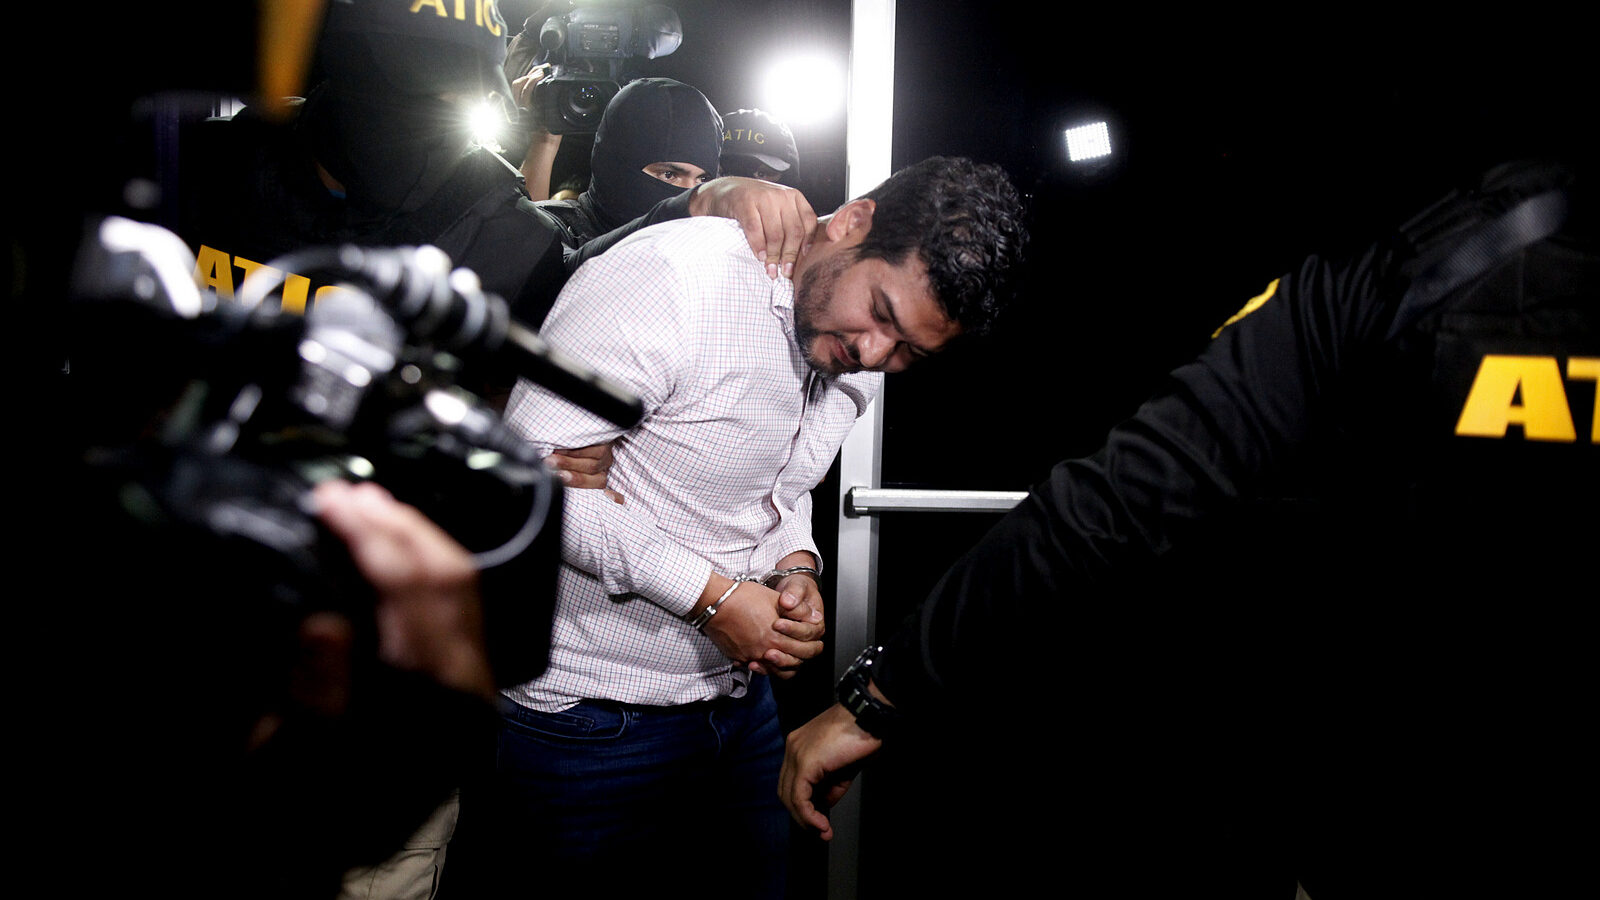 Roberto David Castillo is taken into custody by the police as he is walked to the Technical Investigation Agency in Tegucigalpa, Honduras, March 2, 2018. (AP/Fernando Antonio)